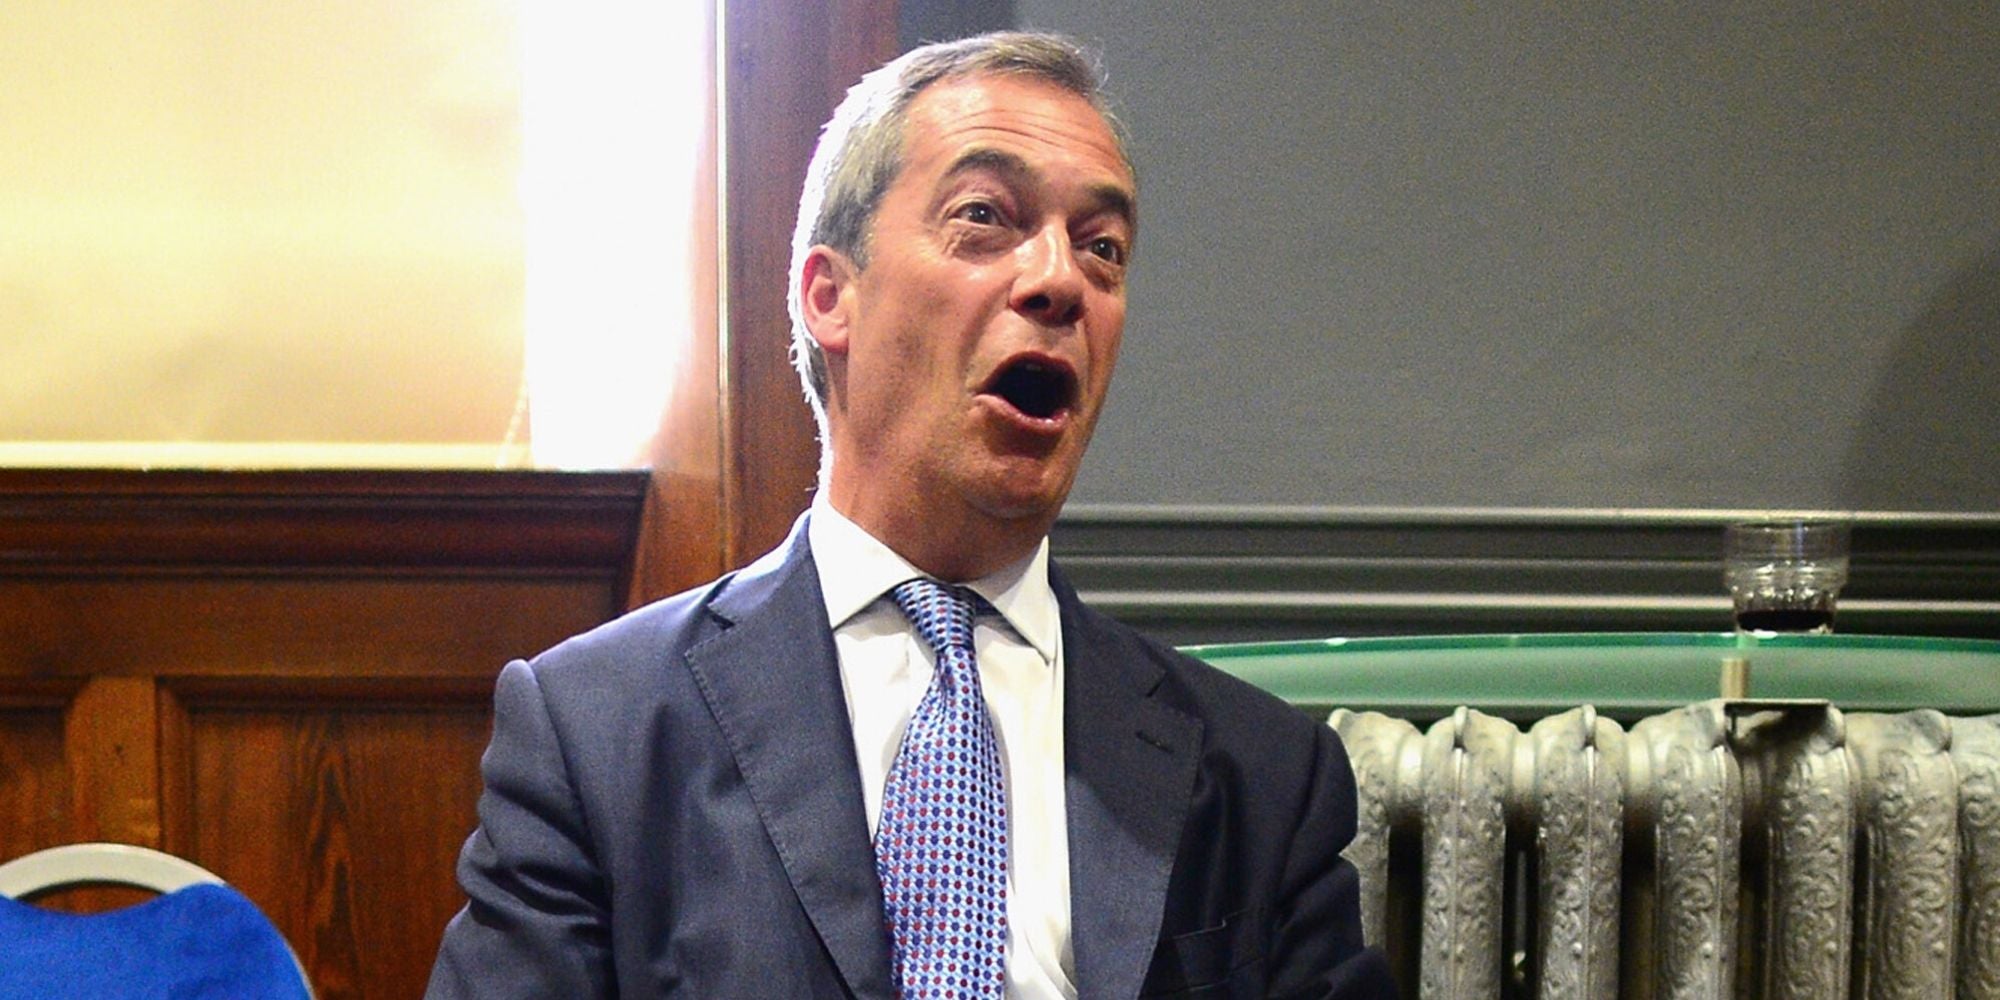 Nigel Farage reported to police for visiting pub after US Trump rally trip